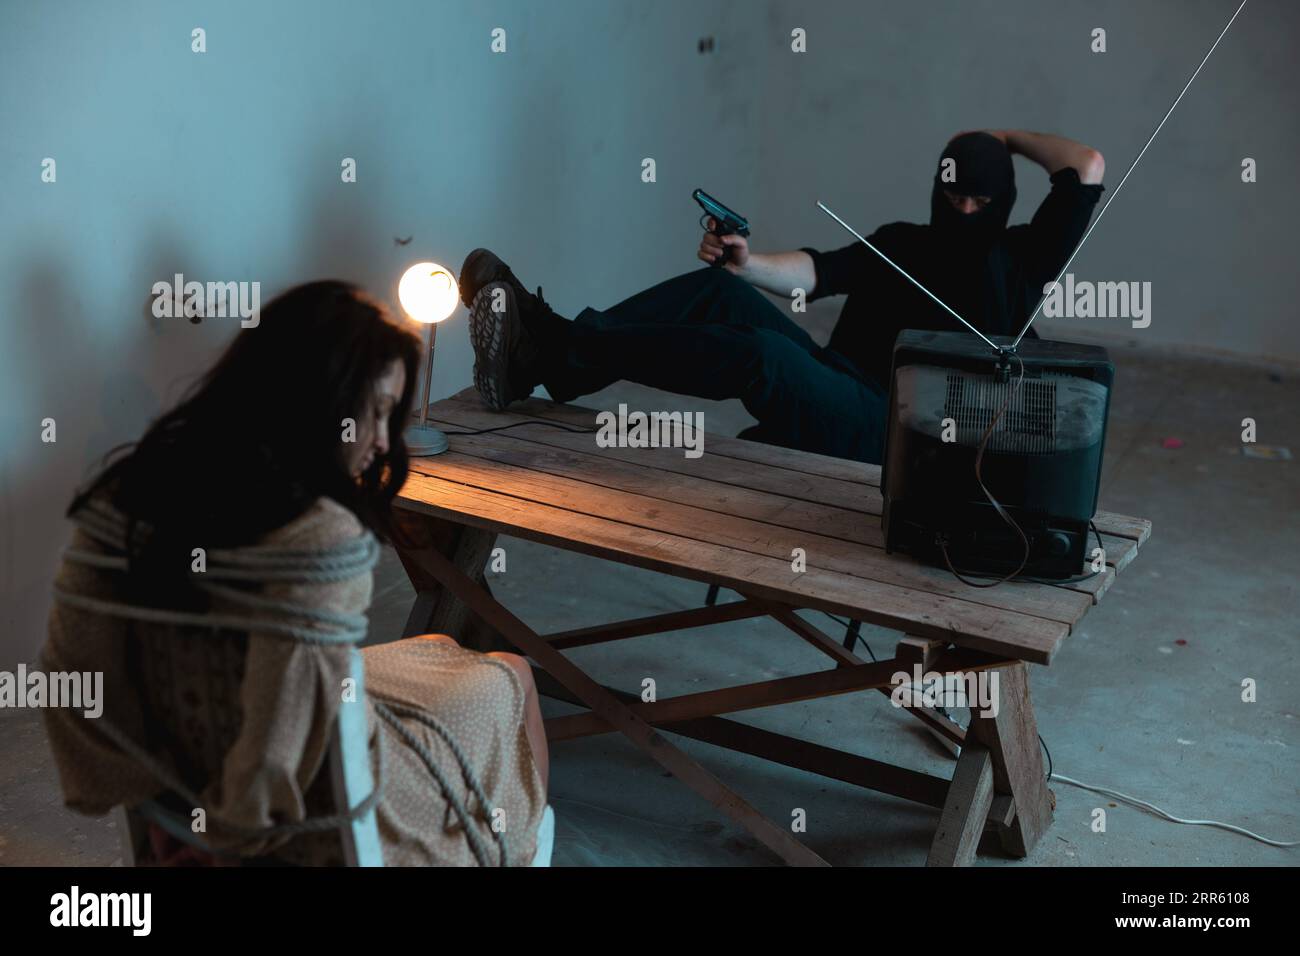 Kidnapper in balaclava sitting in front of the kidnapped woman and holding a gun while watching TV. Crime, kidnapping, violence concept Stock Photo